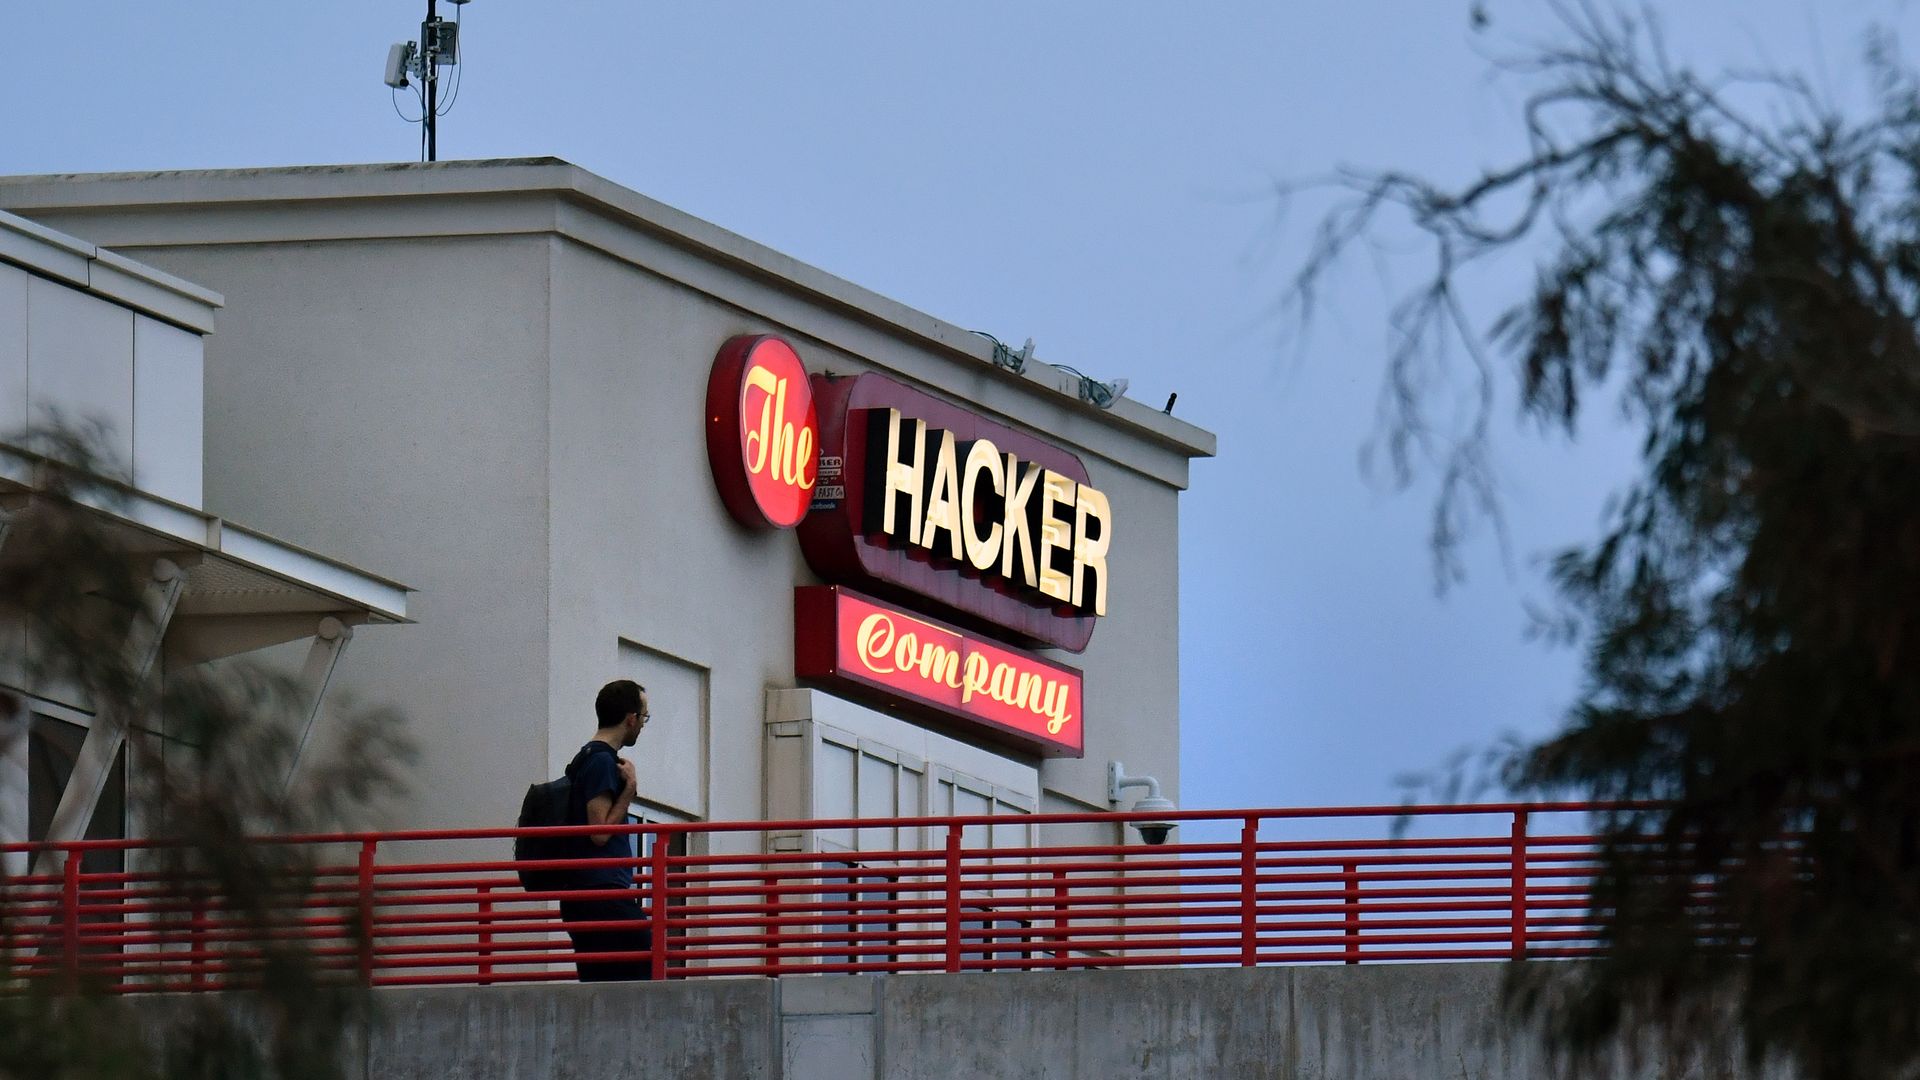 A sign at Facbook headquarters that says "The Hacker Company"